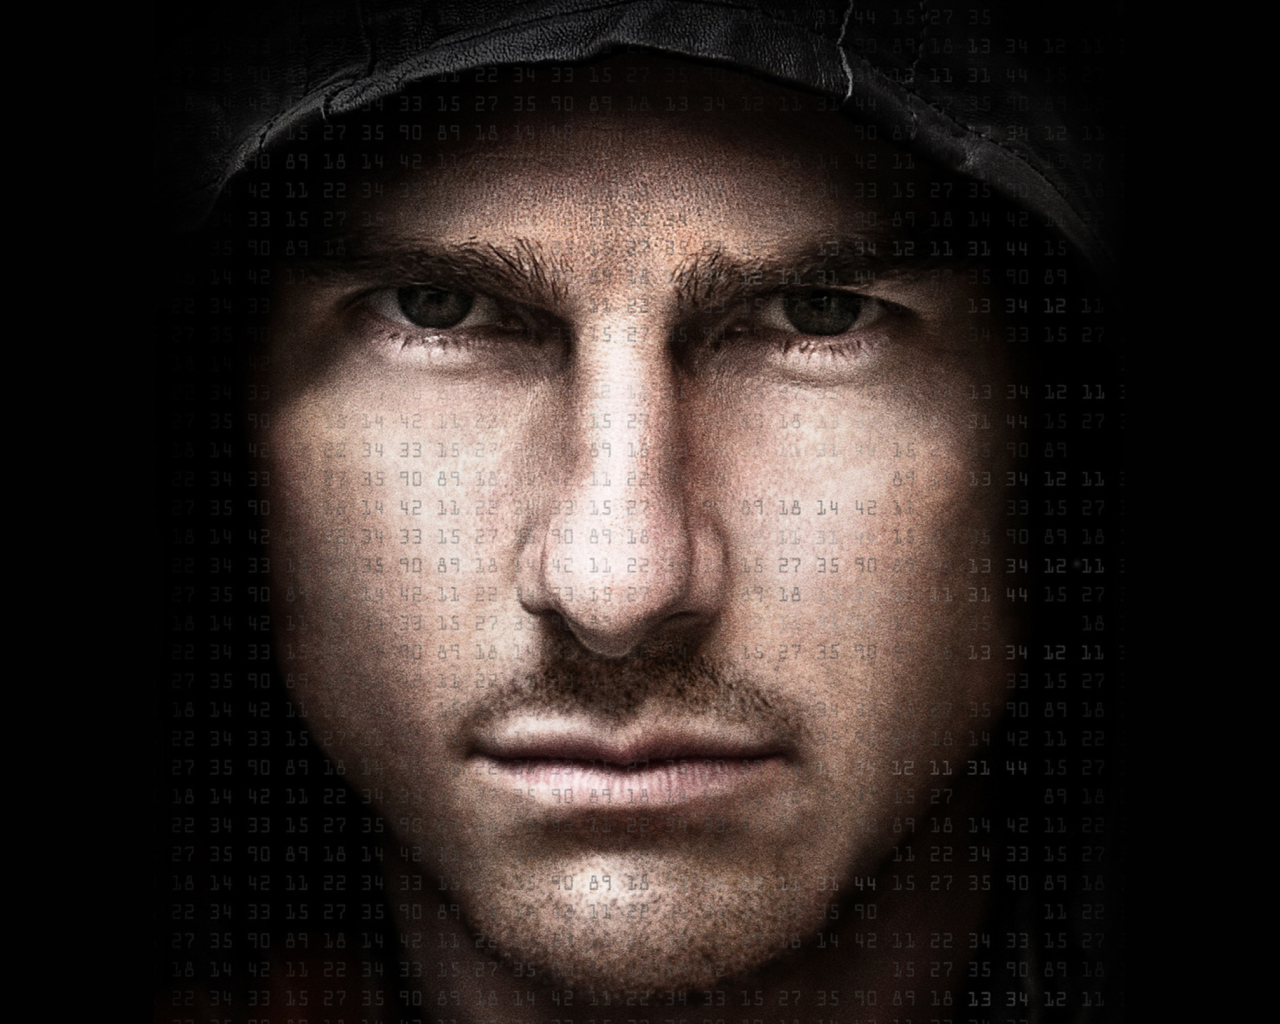 Das Tom Cruise - Mission Impossible 4 Wallpaper 1280x1024